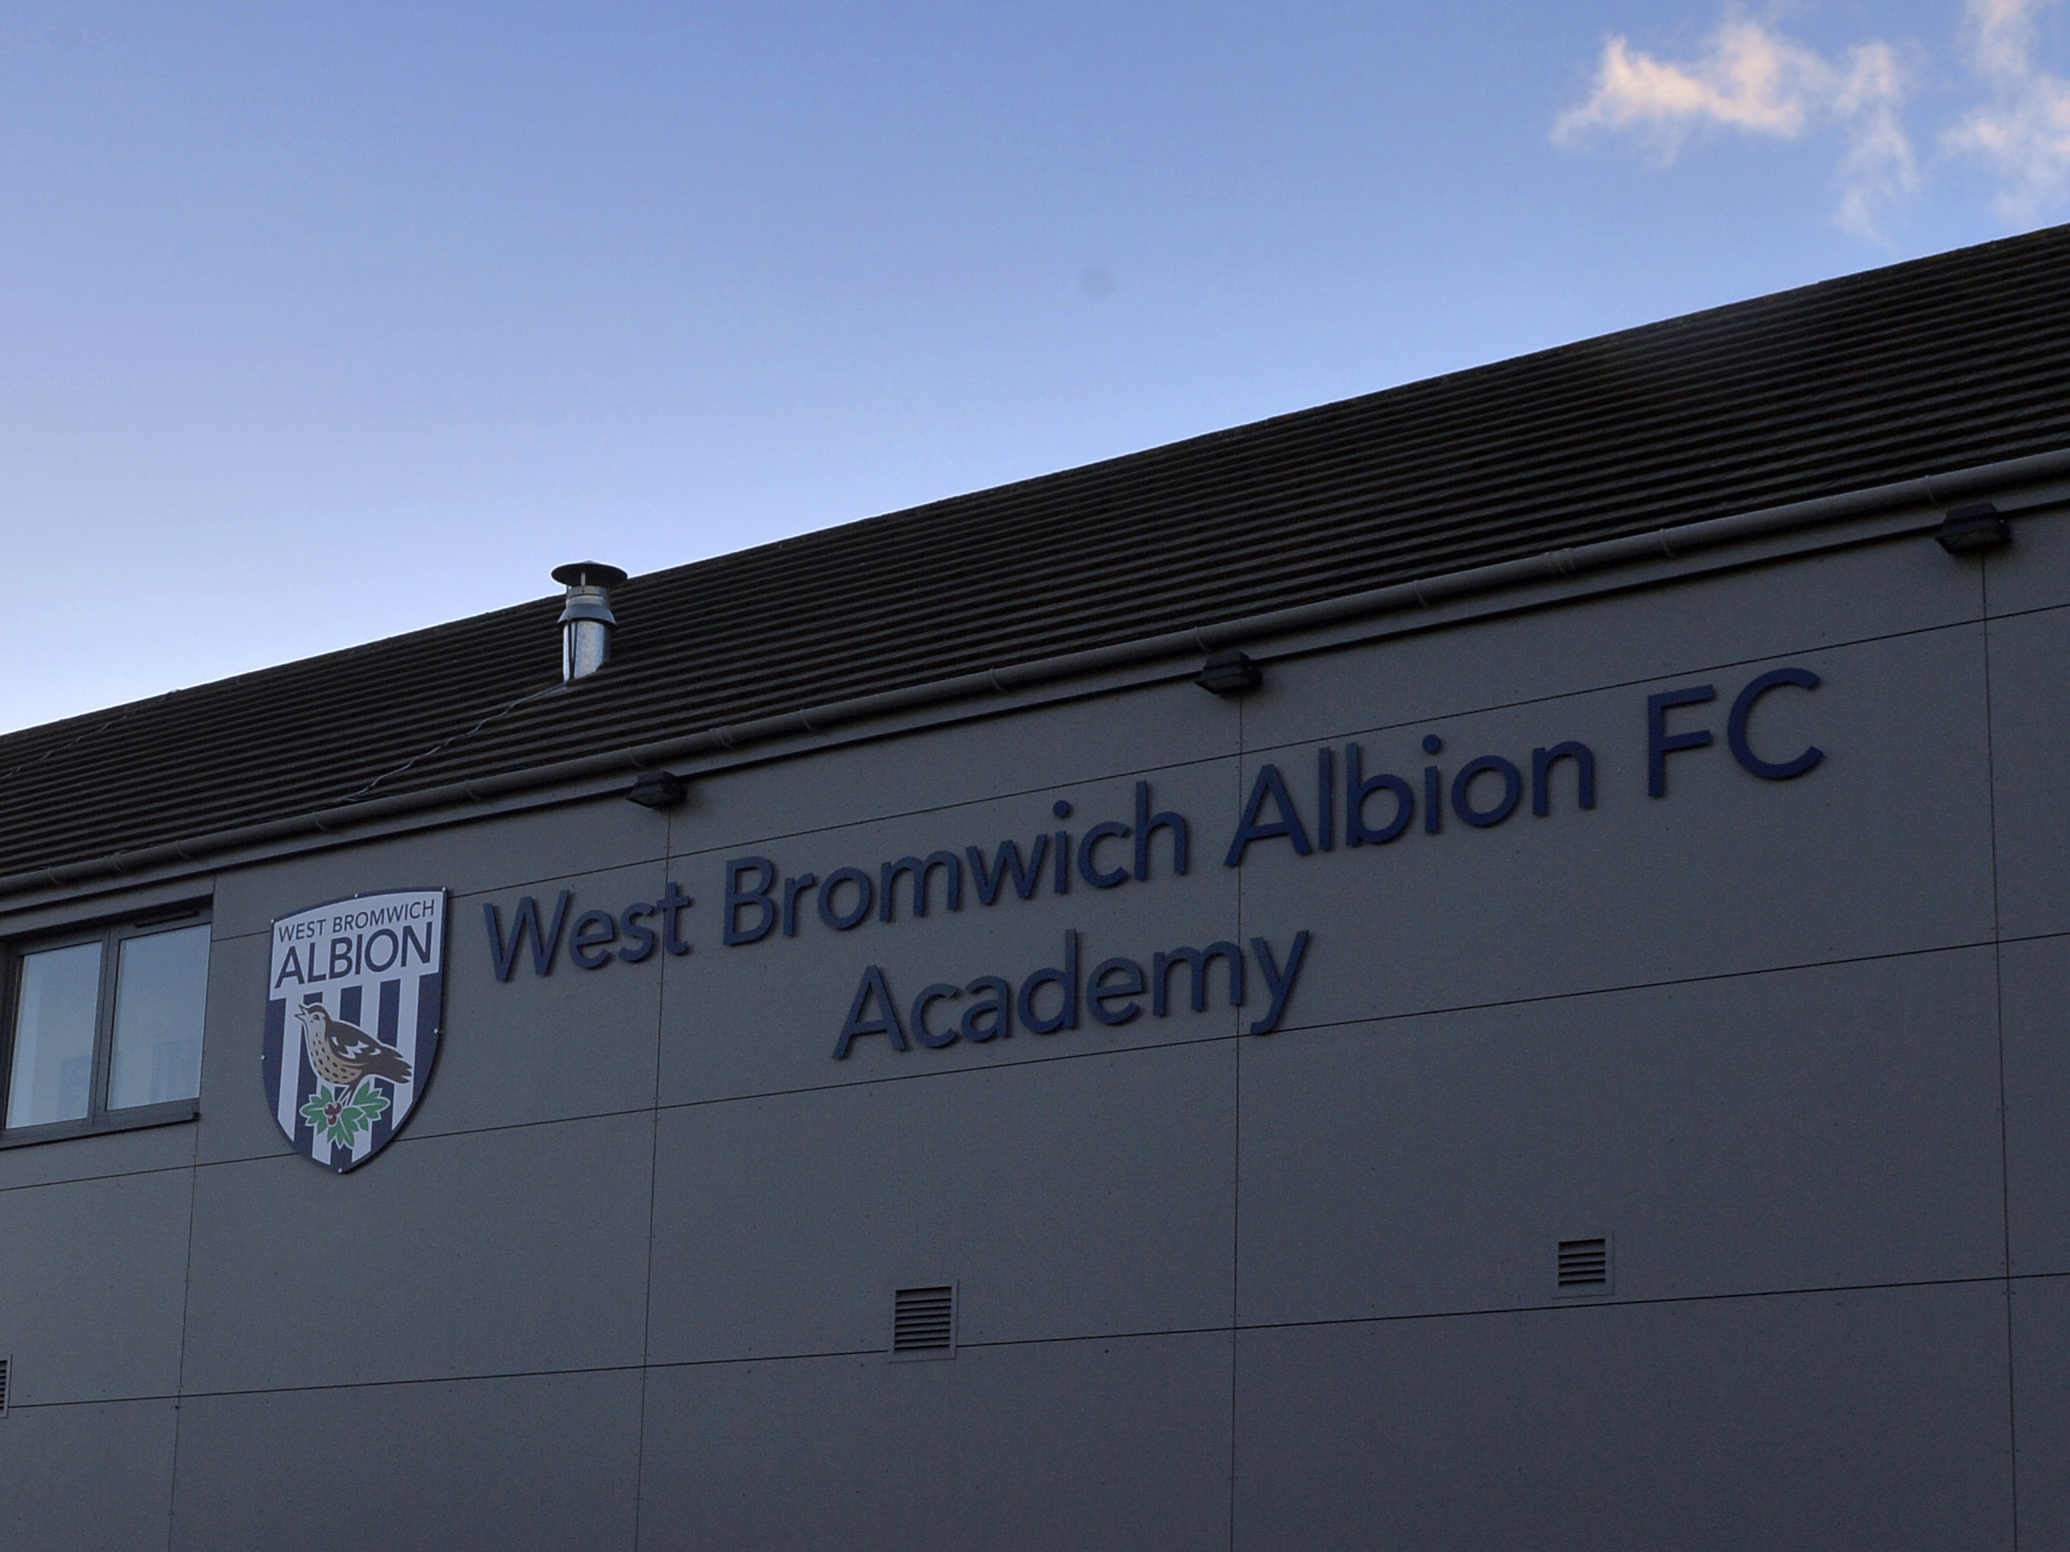 An image of the West Bromwich Albion Academy building